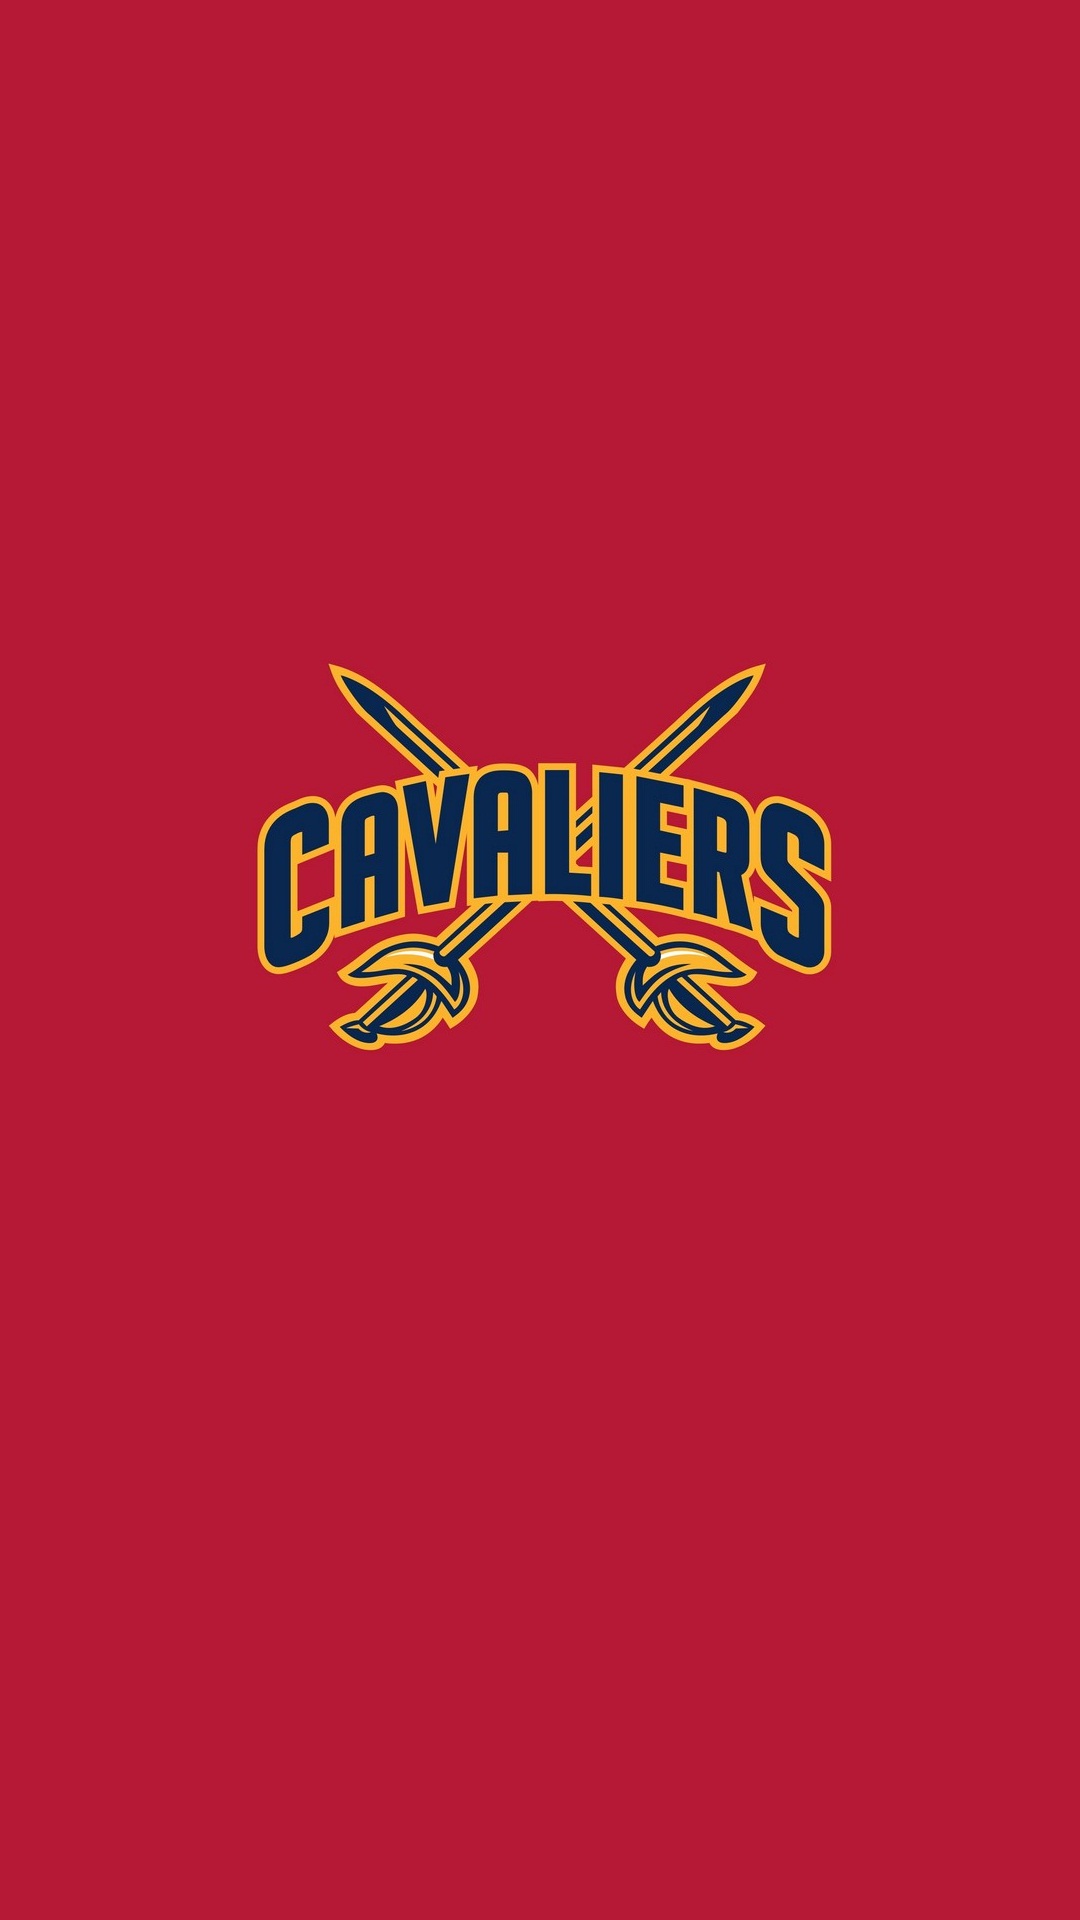 Cleveland Cavaliers Mobile Wallpaper resolution 1080x1920